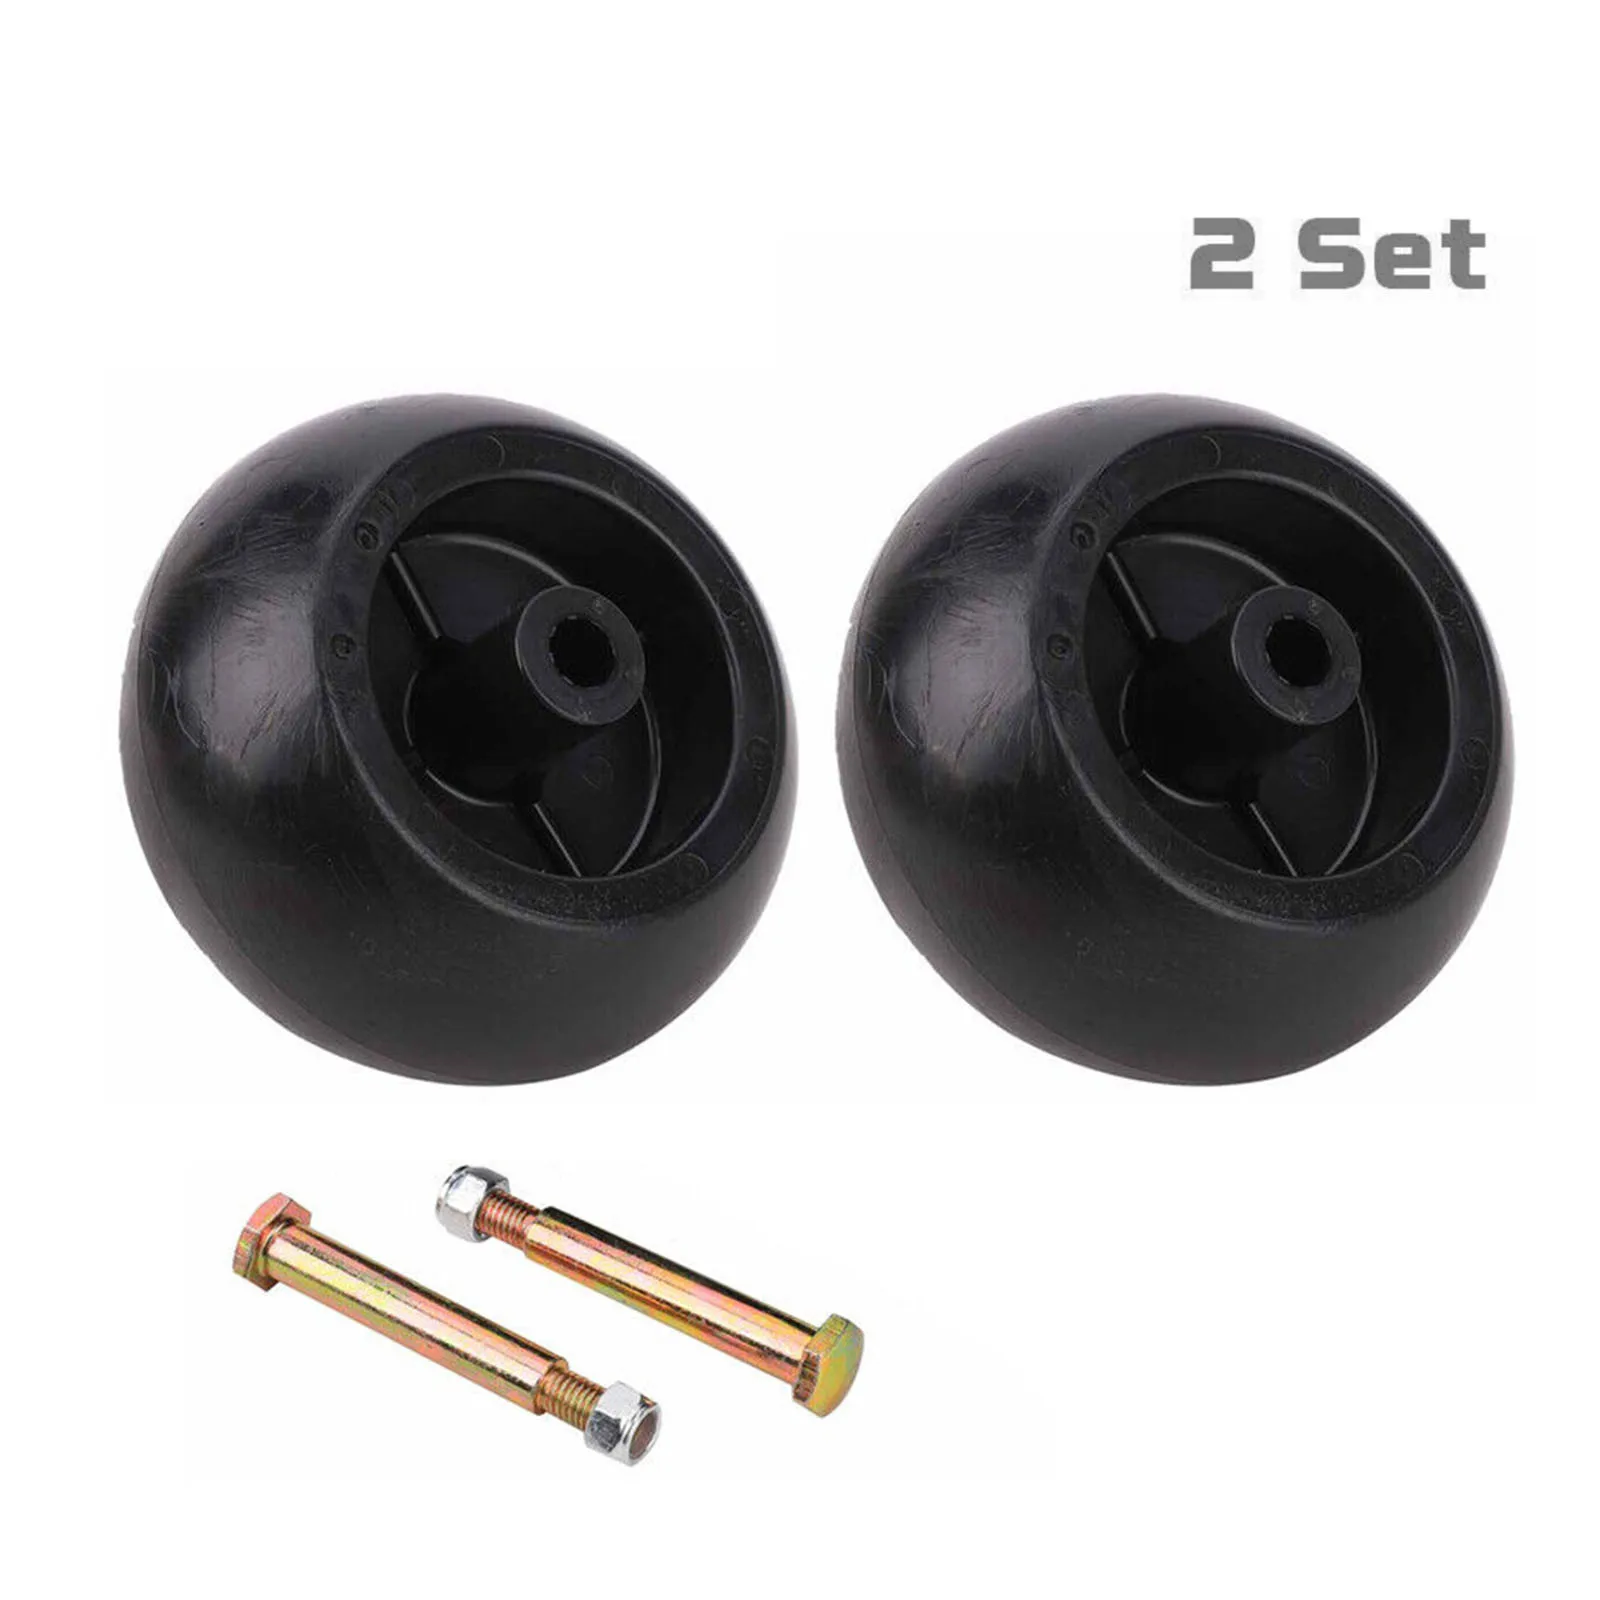 

2PCS 5inch Deck Wheels And Axle Bolts For Hustler For Murray For Toro Ride On Mowers Garden Power Tool Replacement Accessories